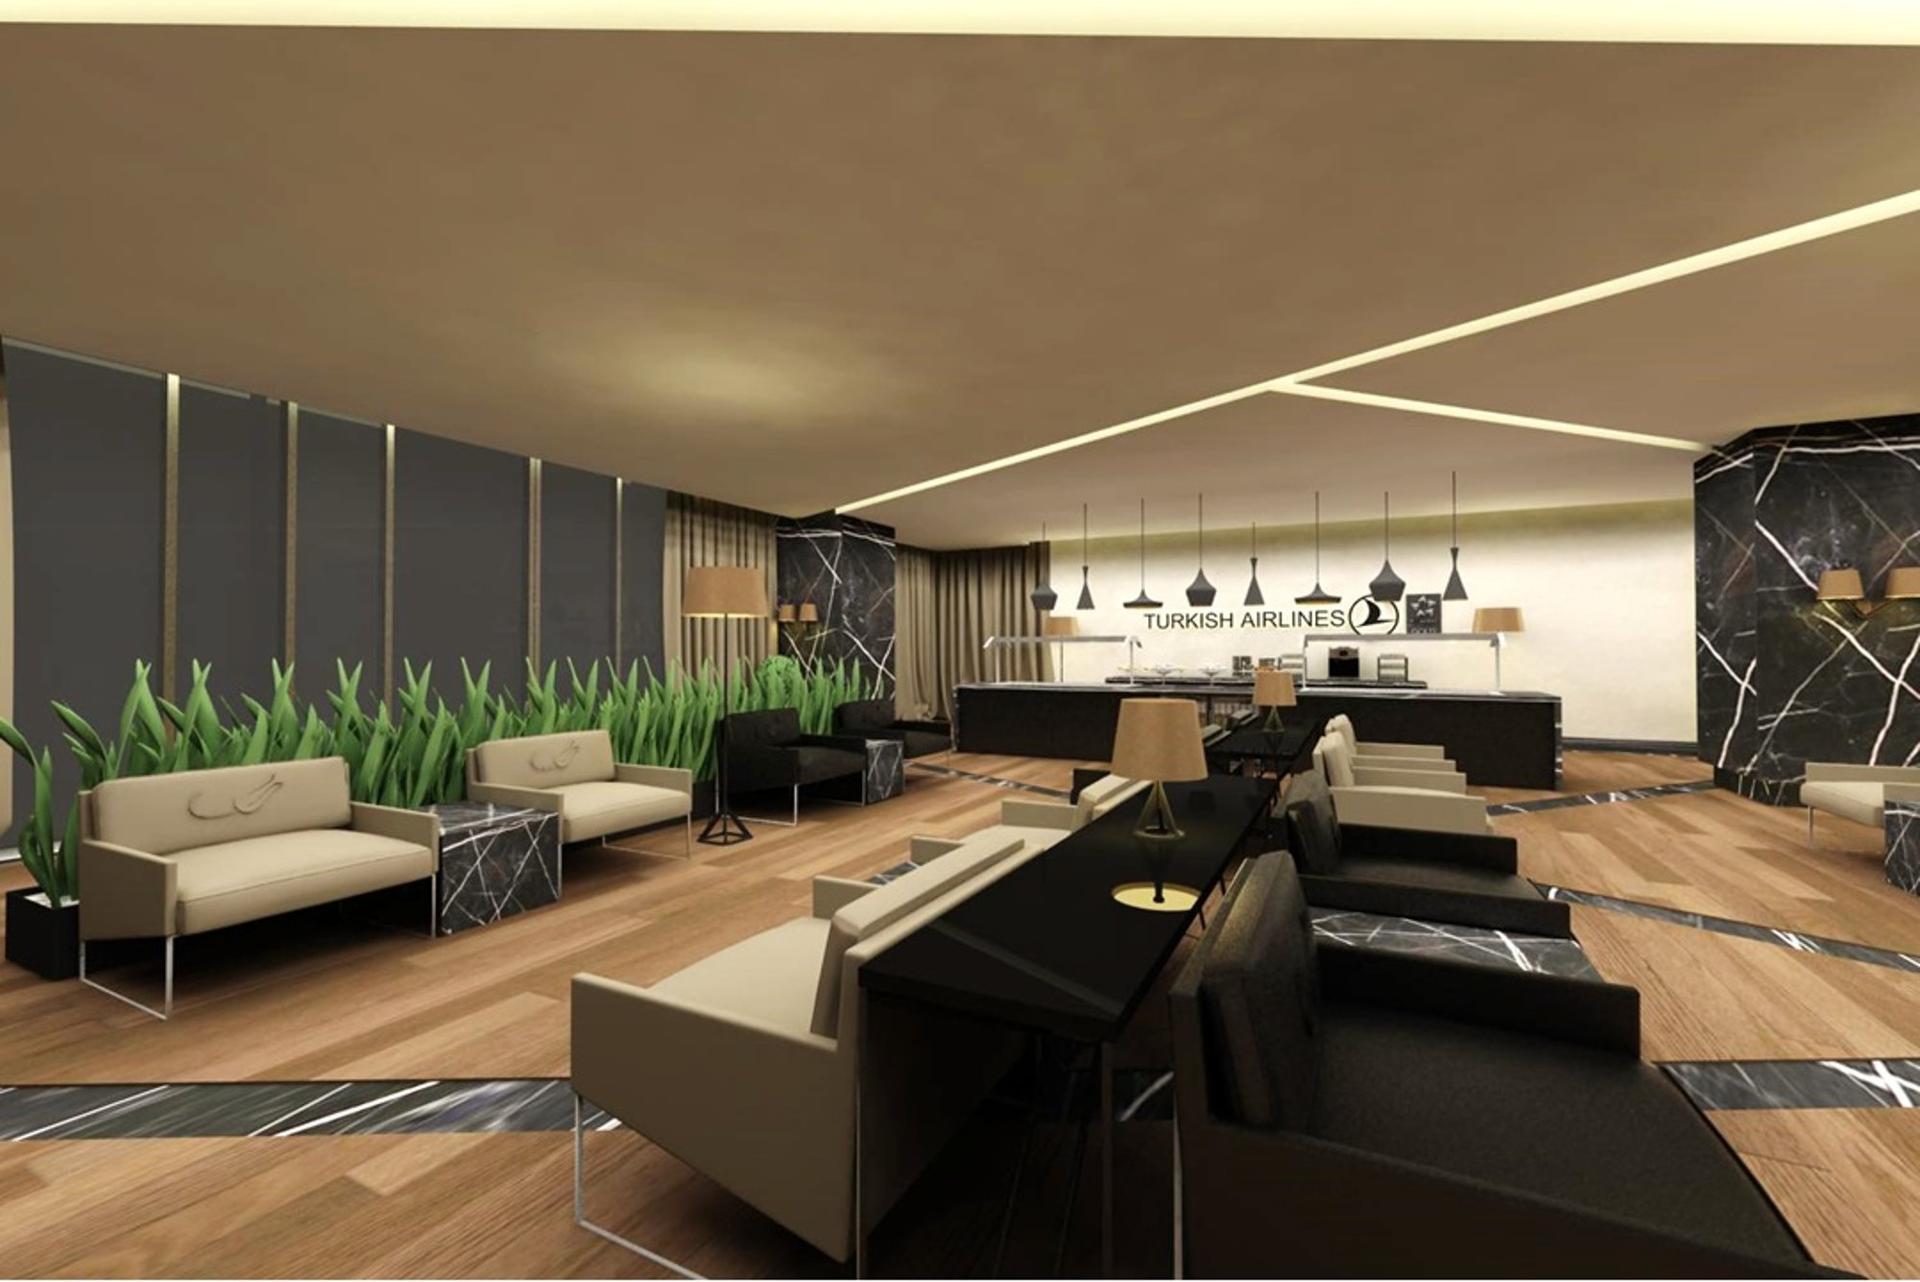 Turkish Airlines CIP Lounge (Business Lounge) image 9 of 27